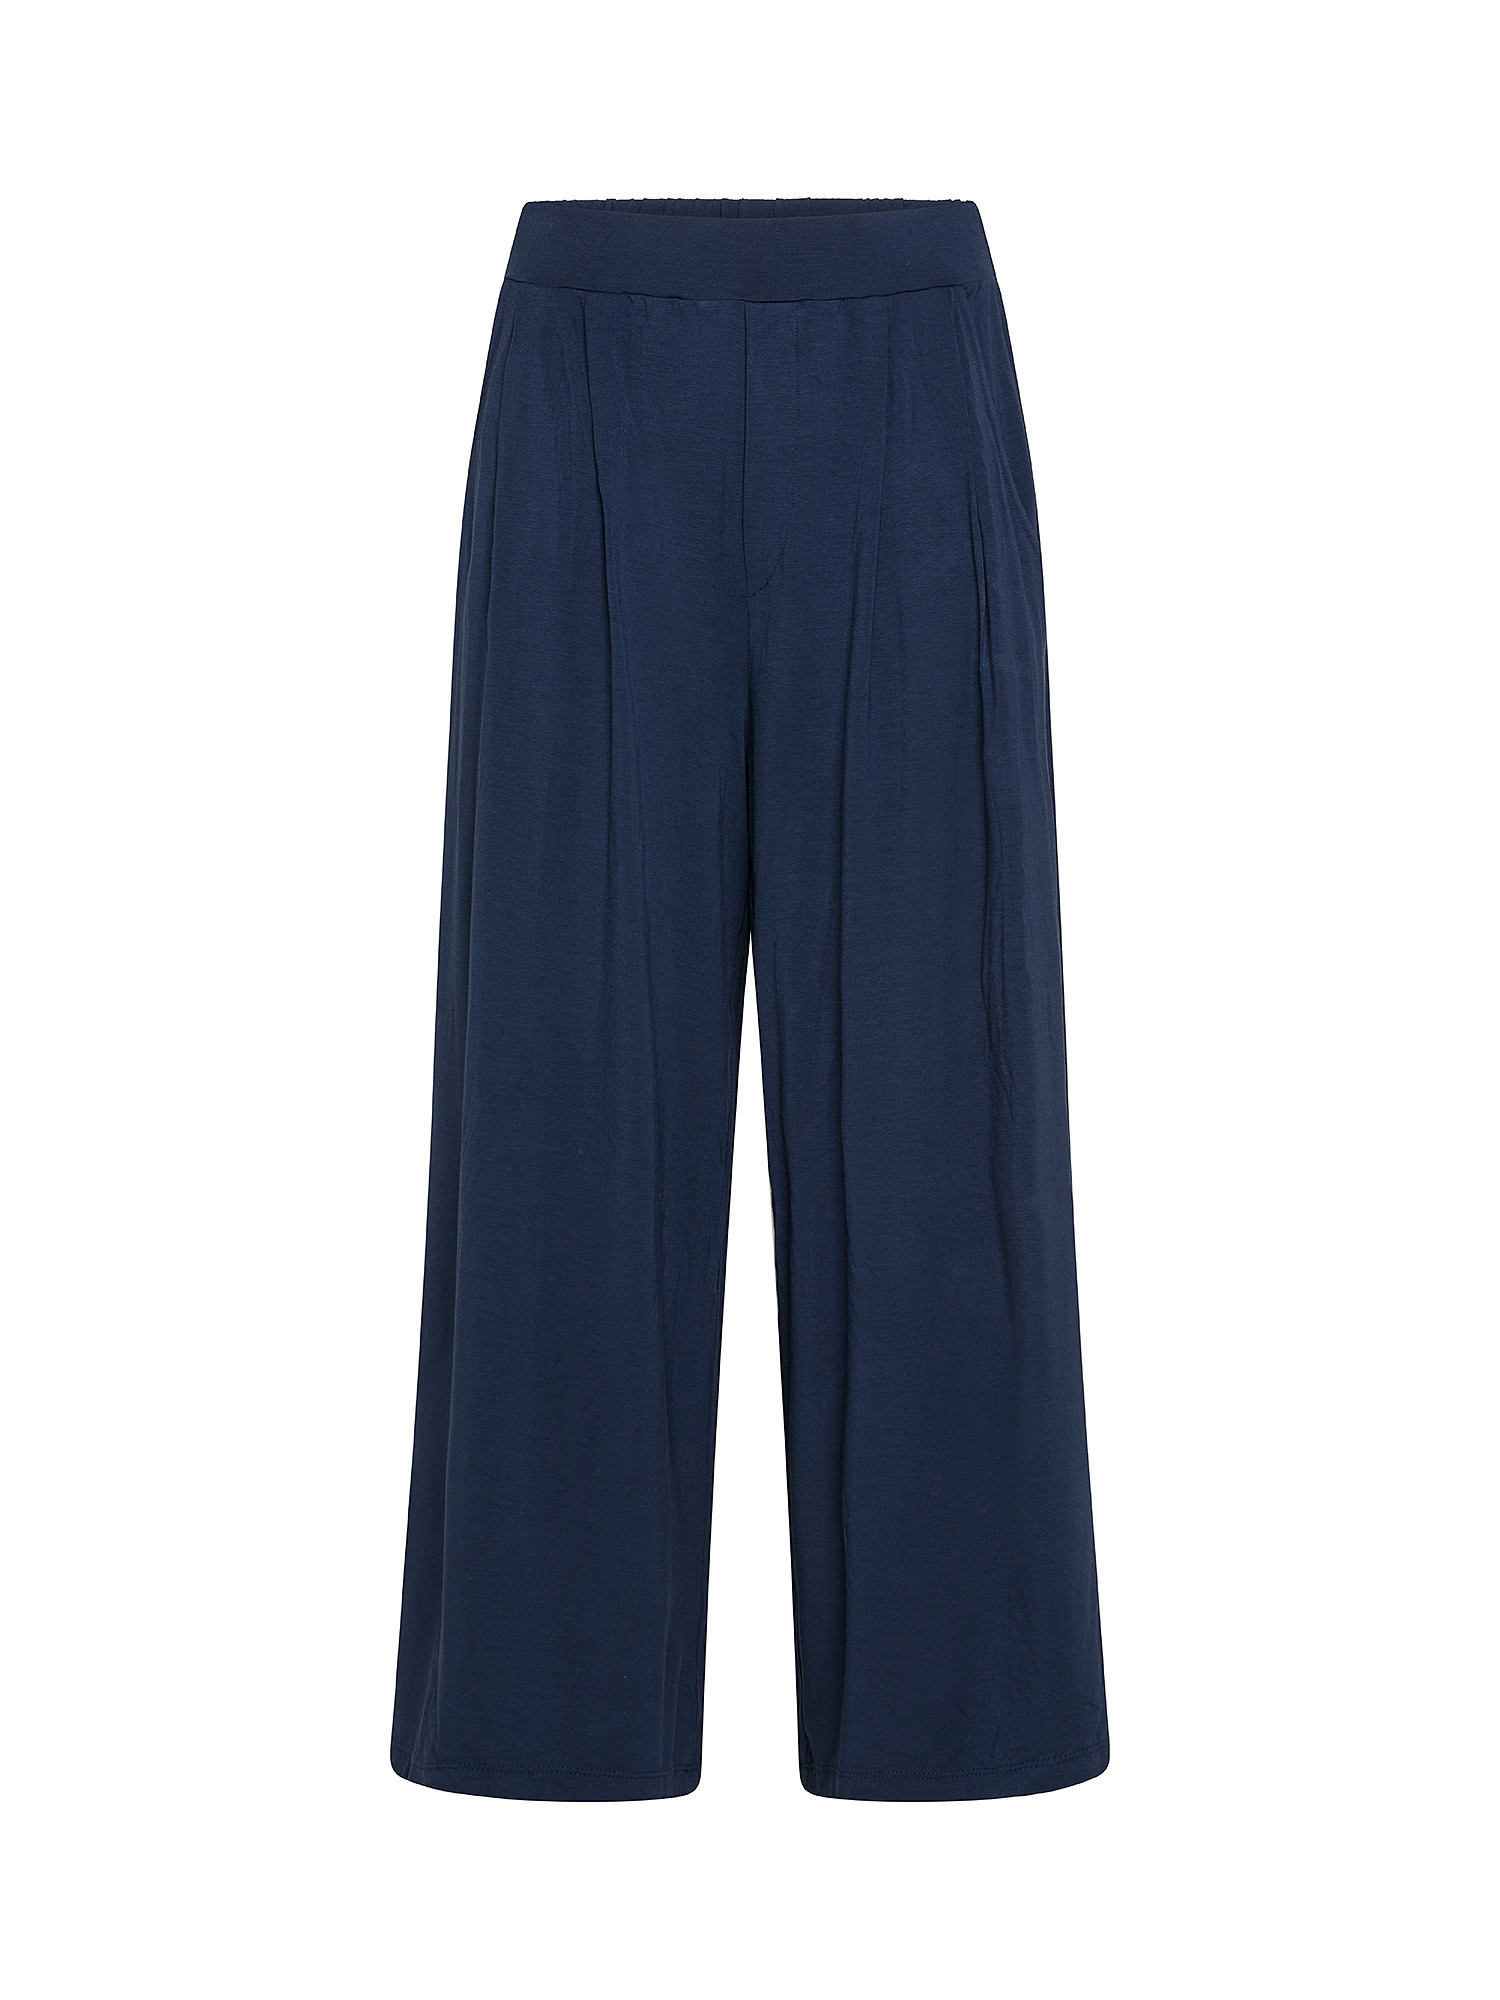 Solid color bamboo viscose trousers, Blue, large image number 0